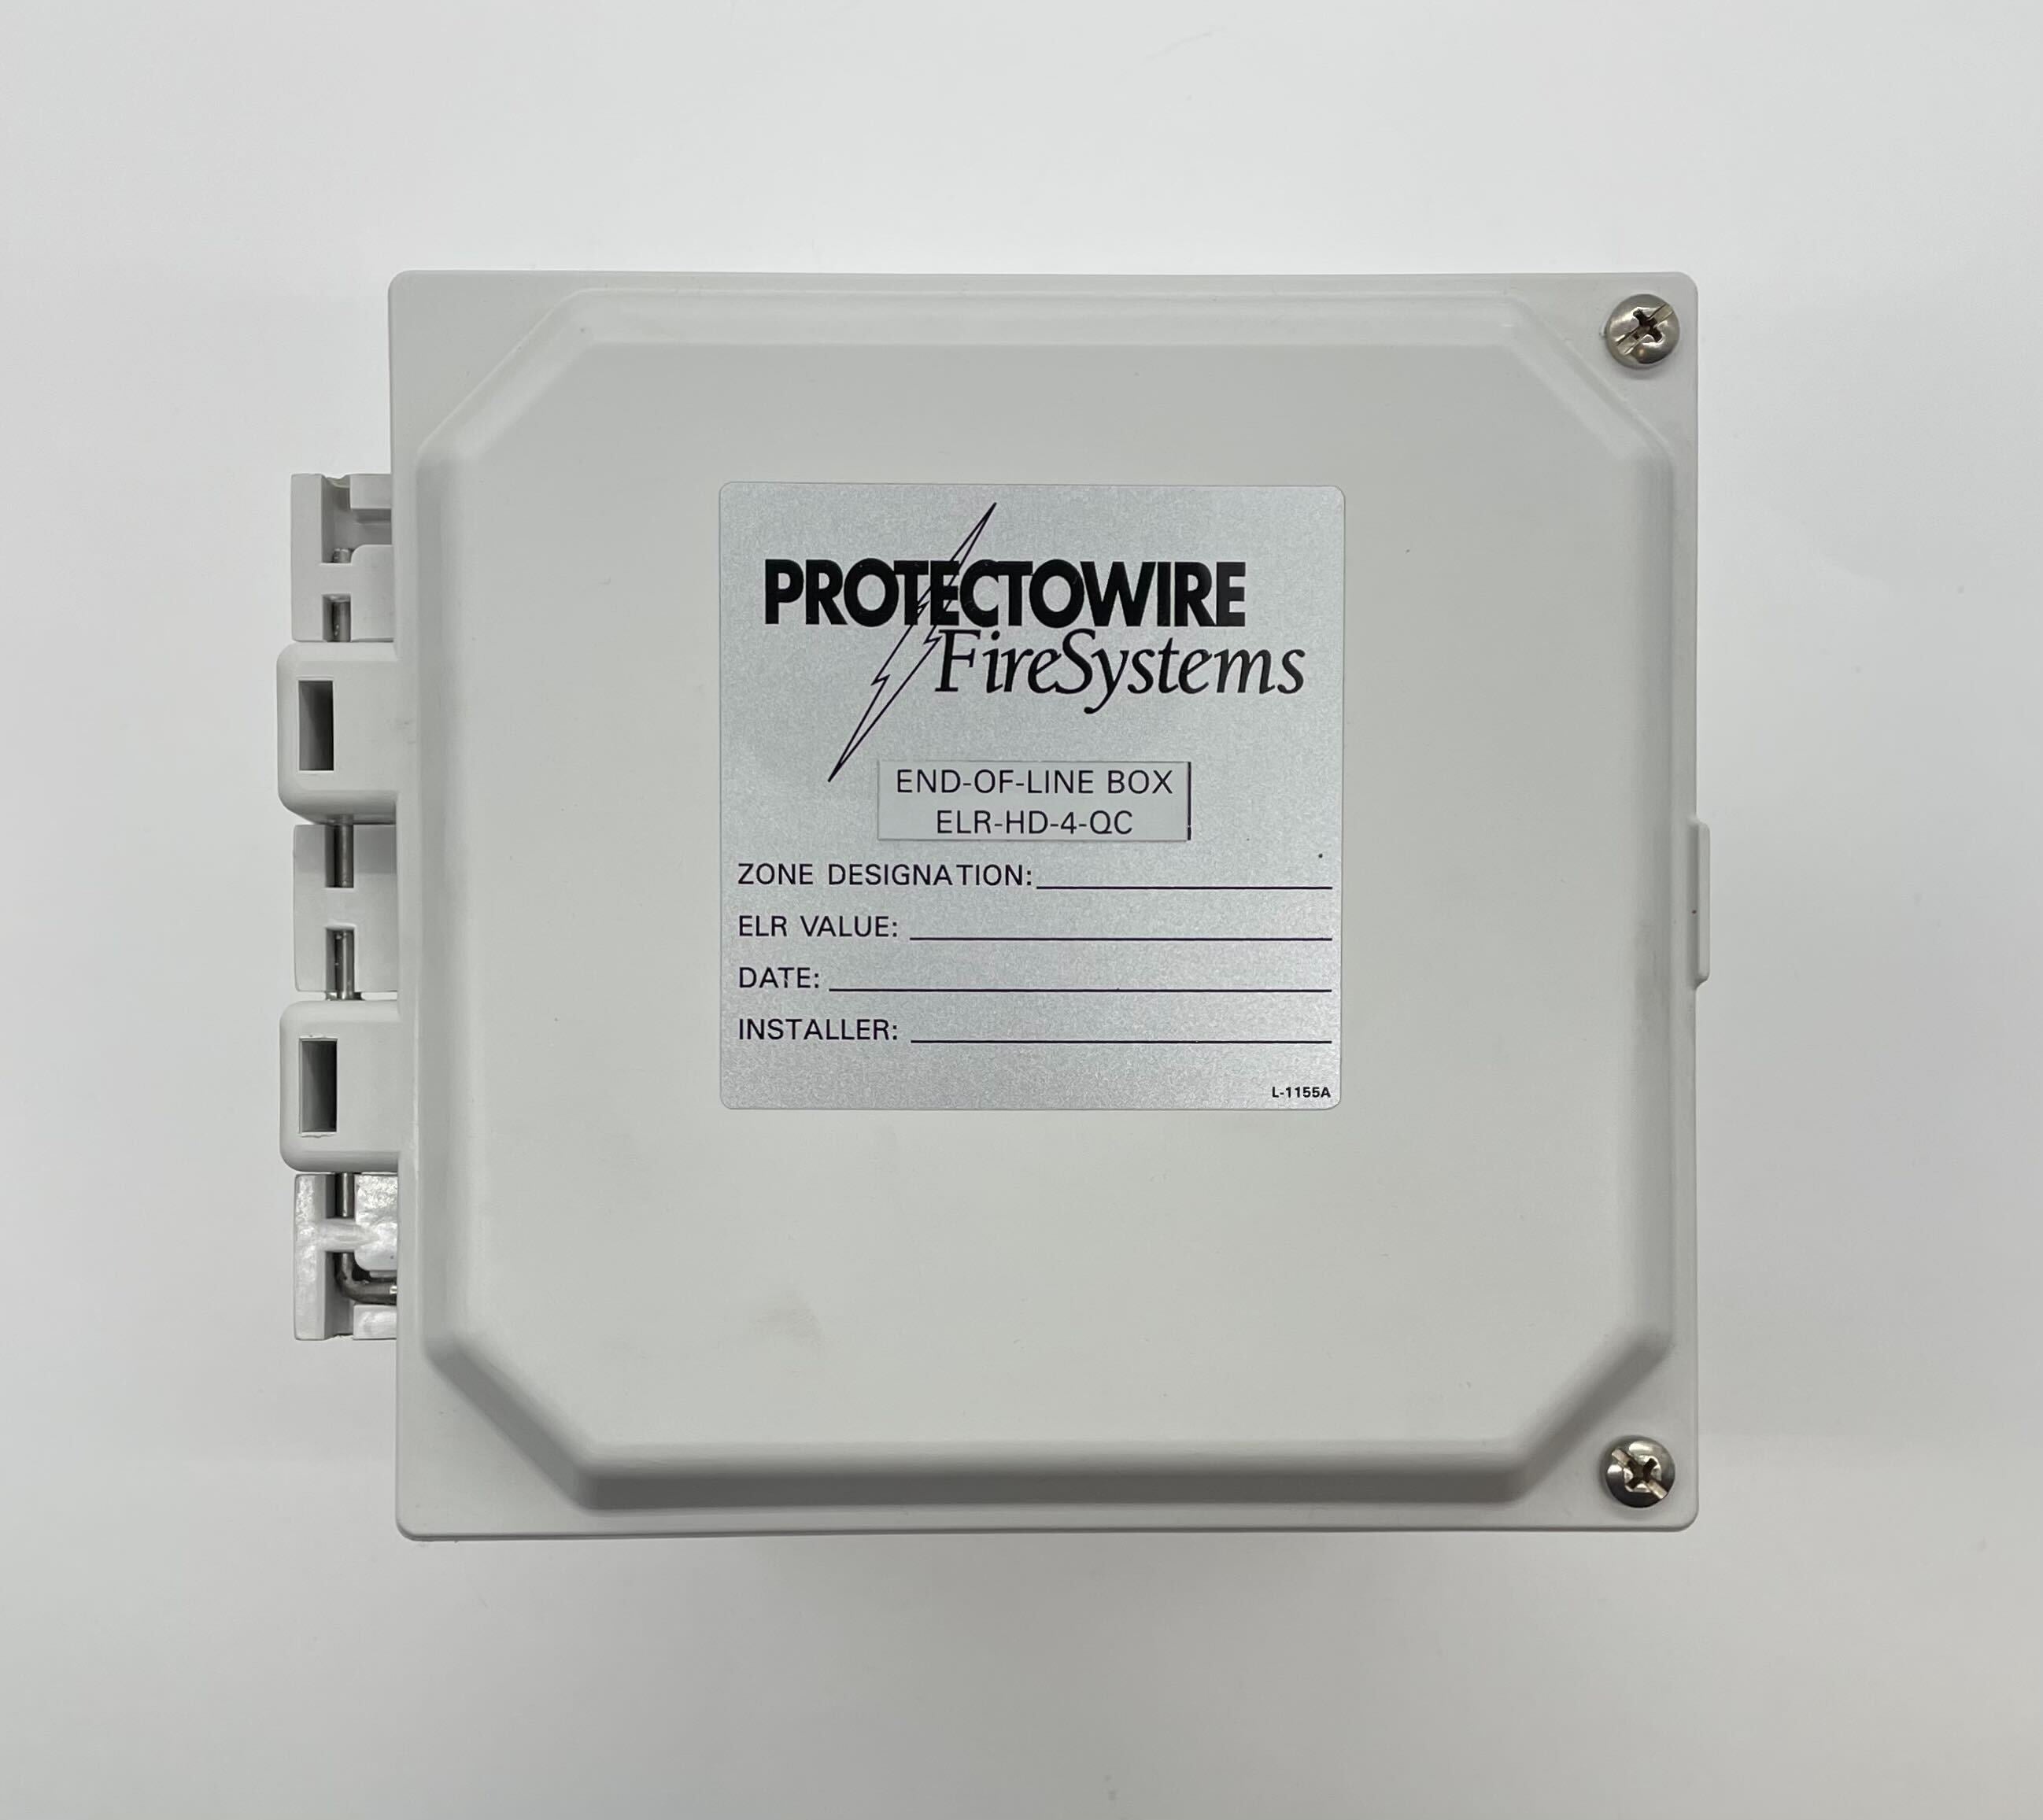 Protectowire ELR-HD-4-QC